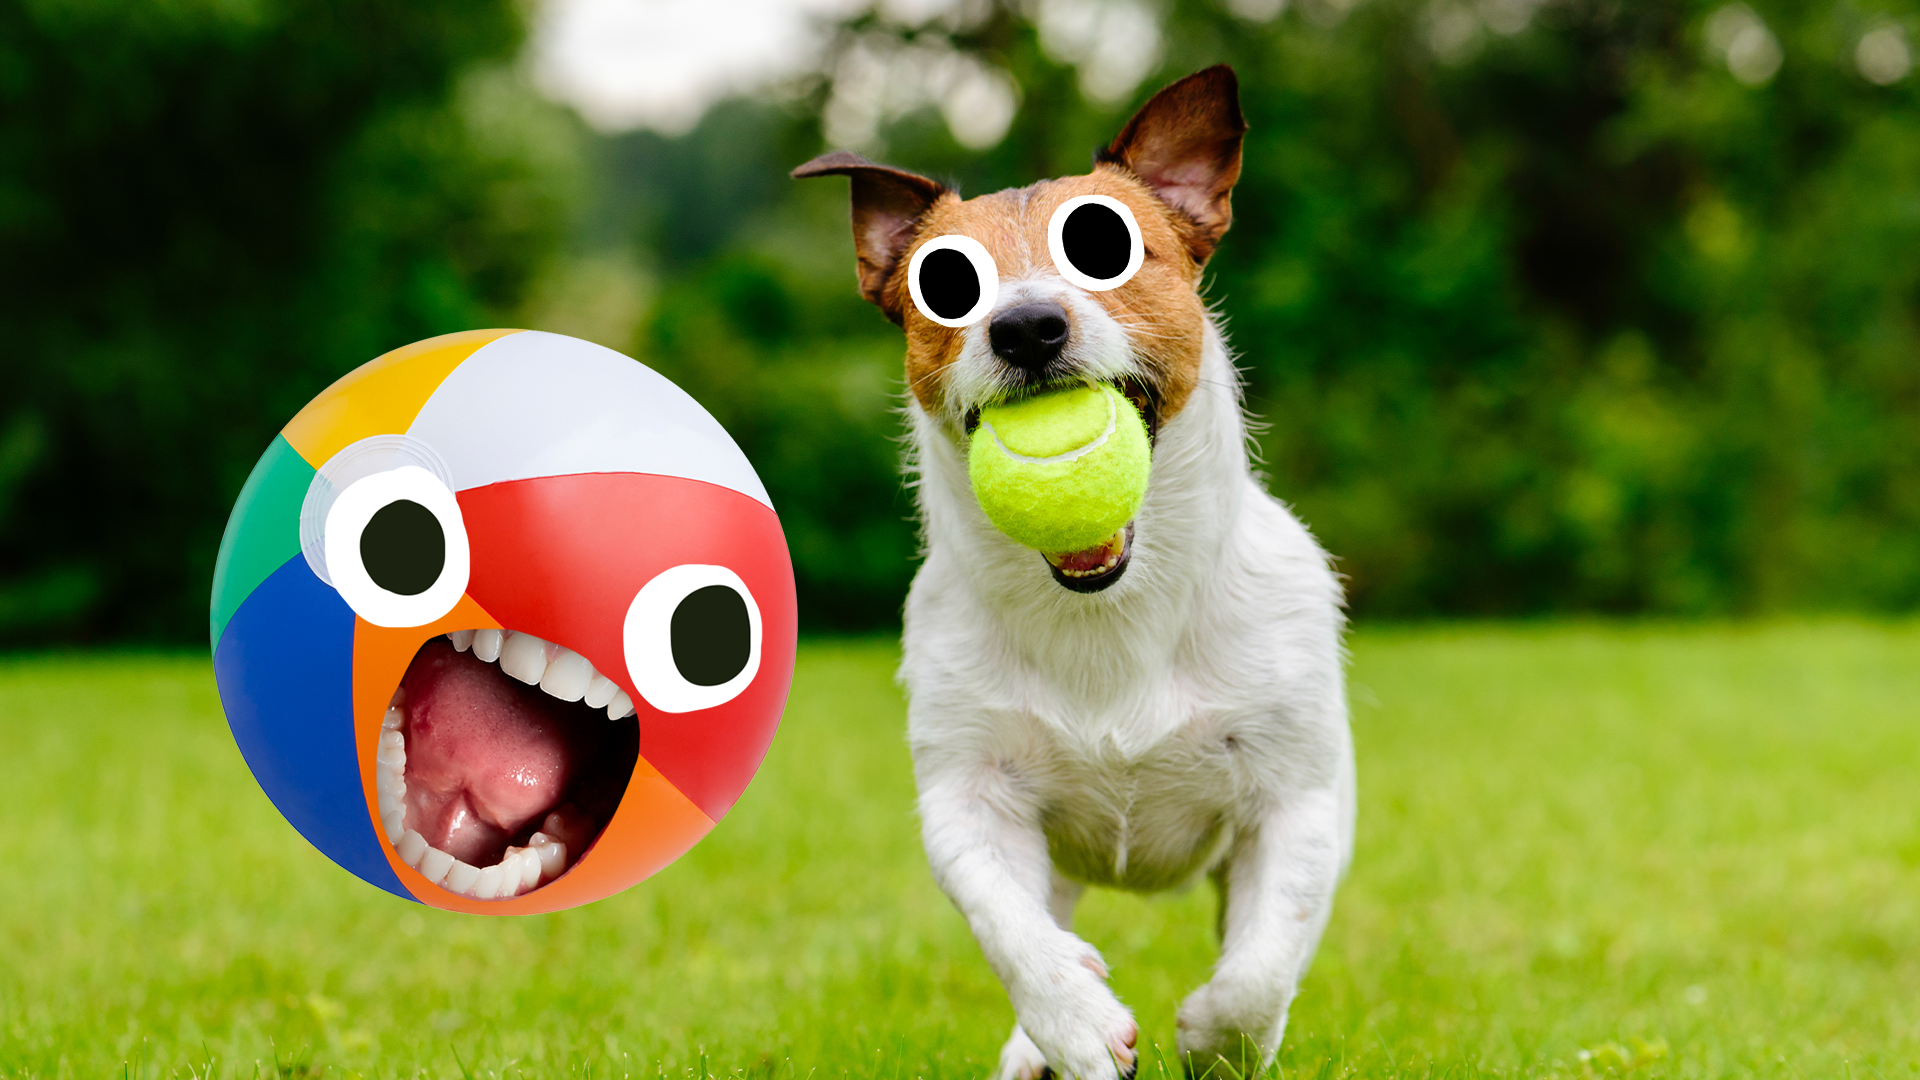 Dog on lawn with tennis ball and screaming Beano beachball